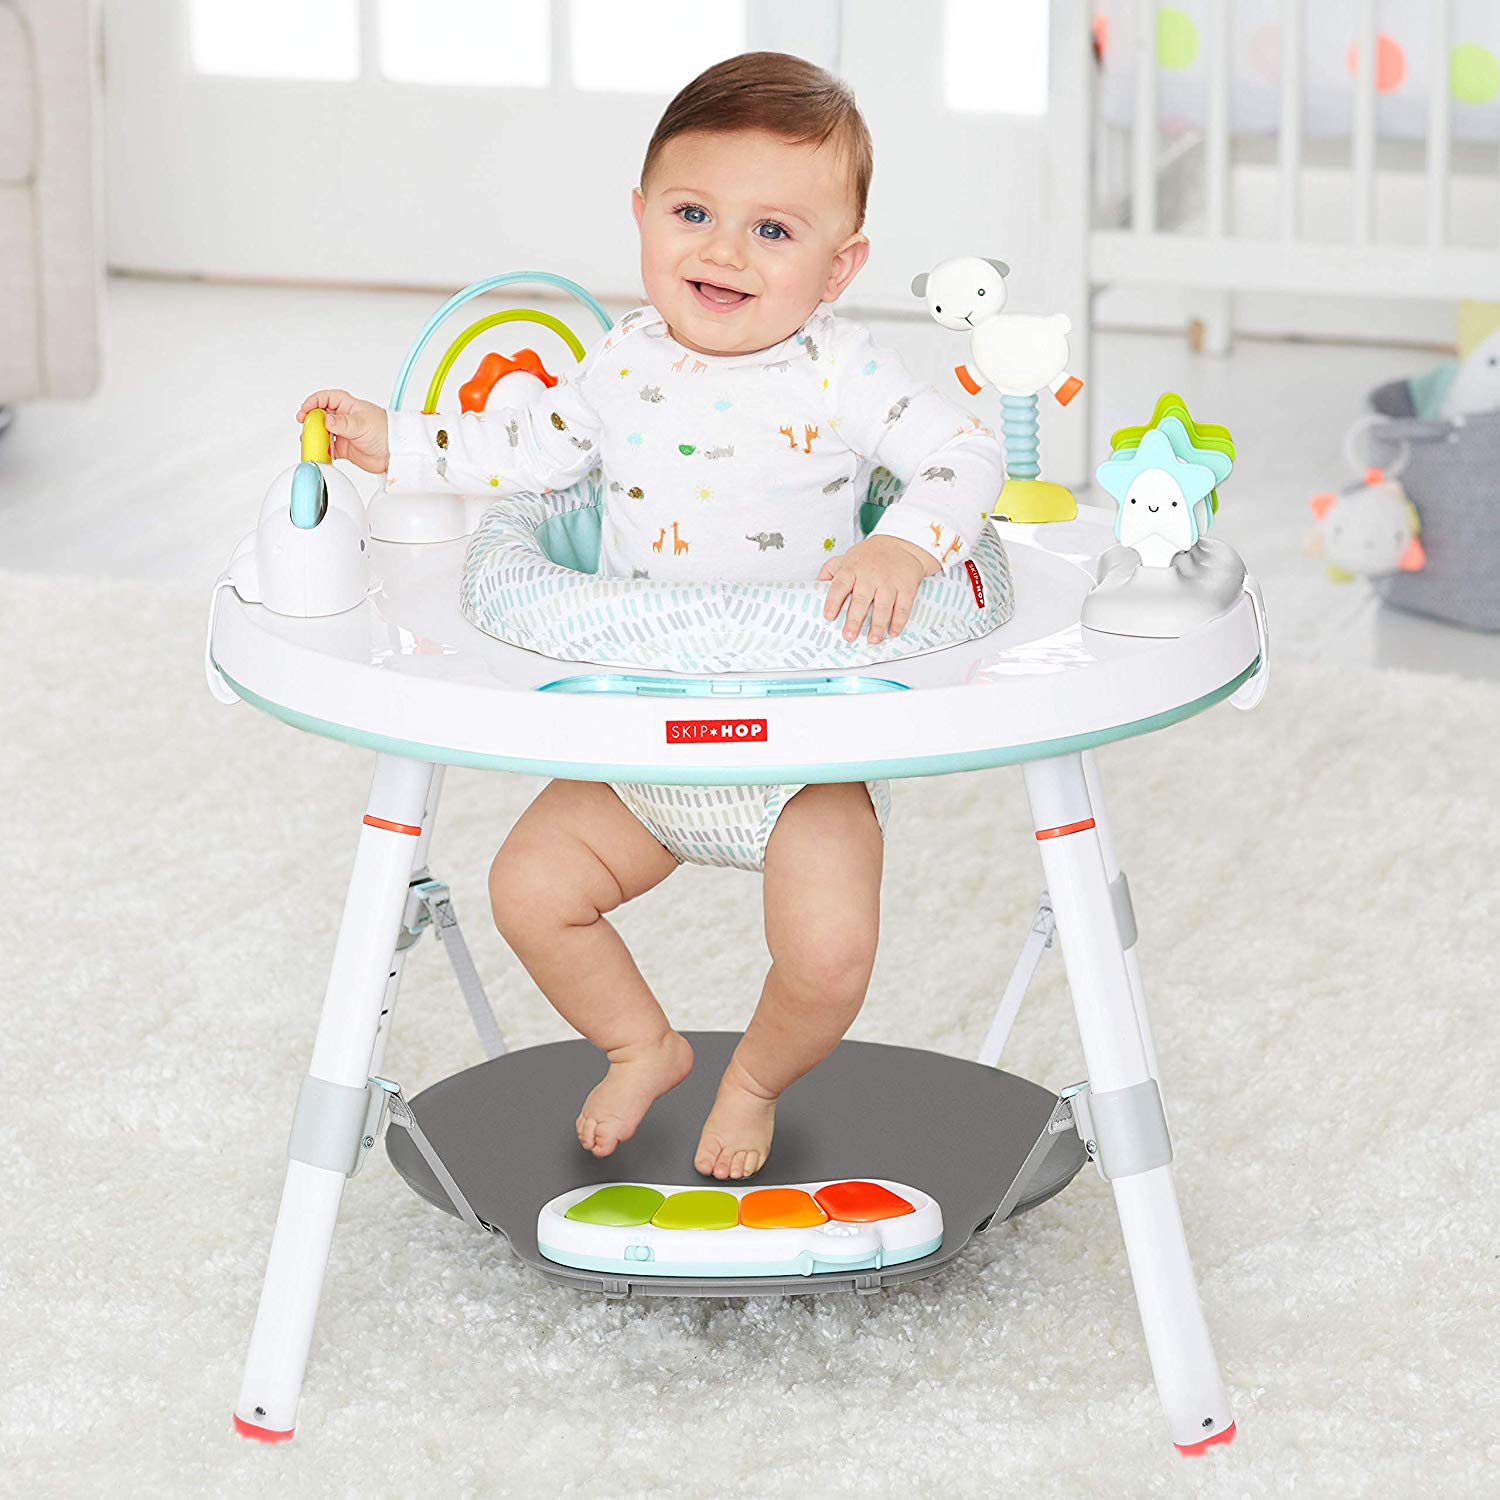 skip hop explore more baby's view 3 stage activity center